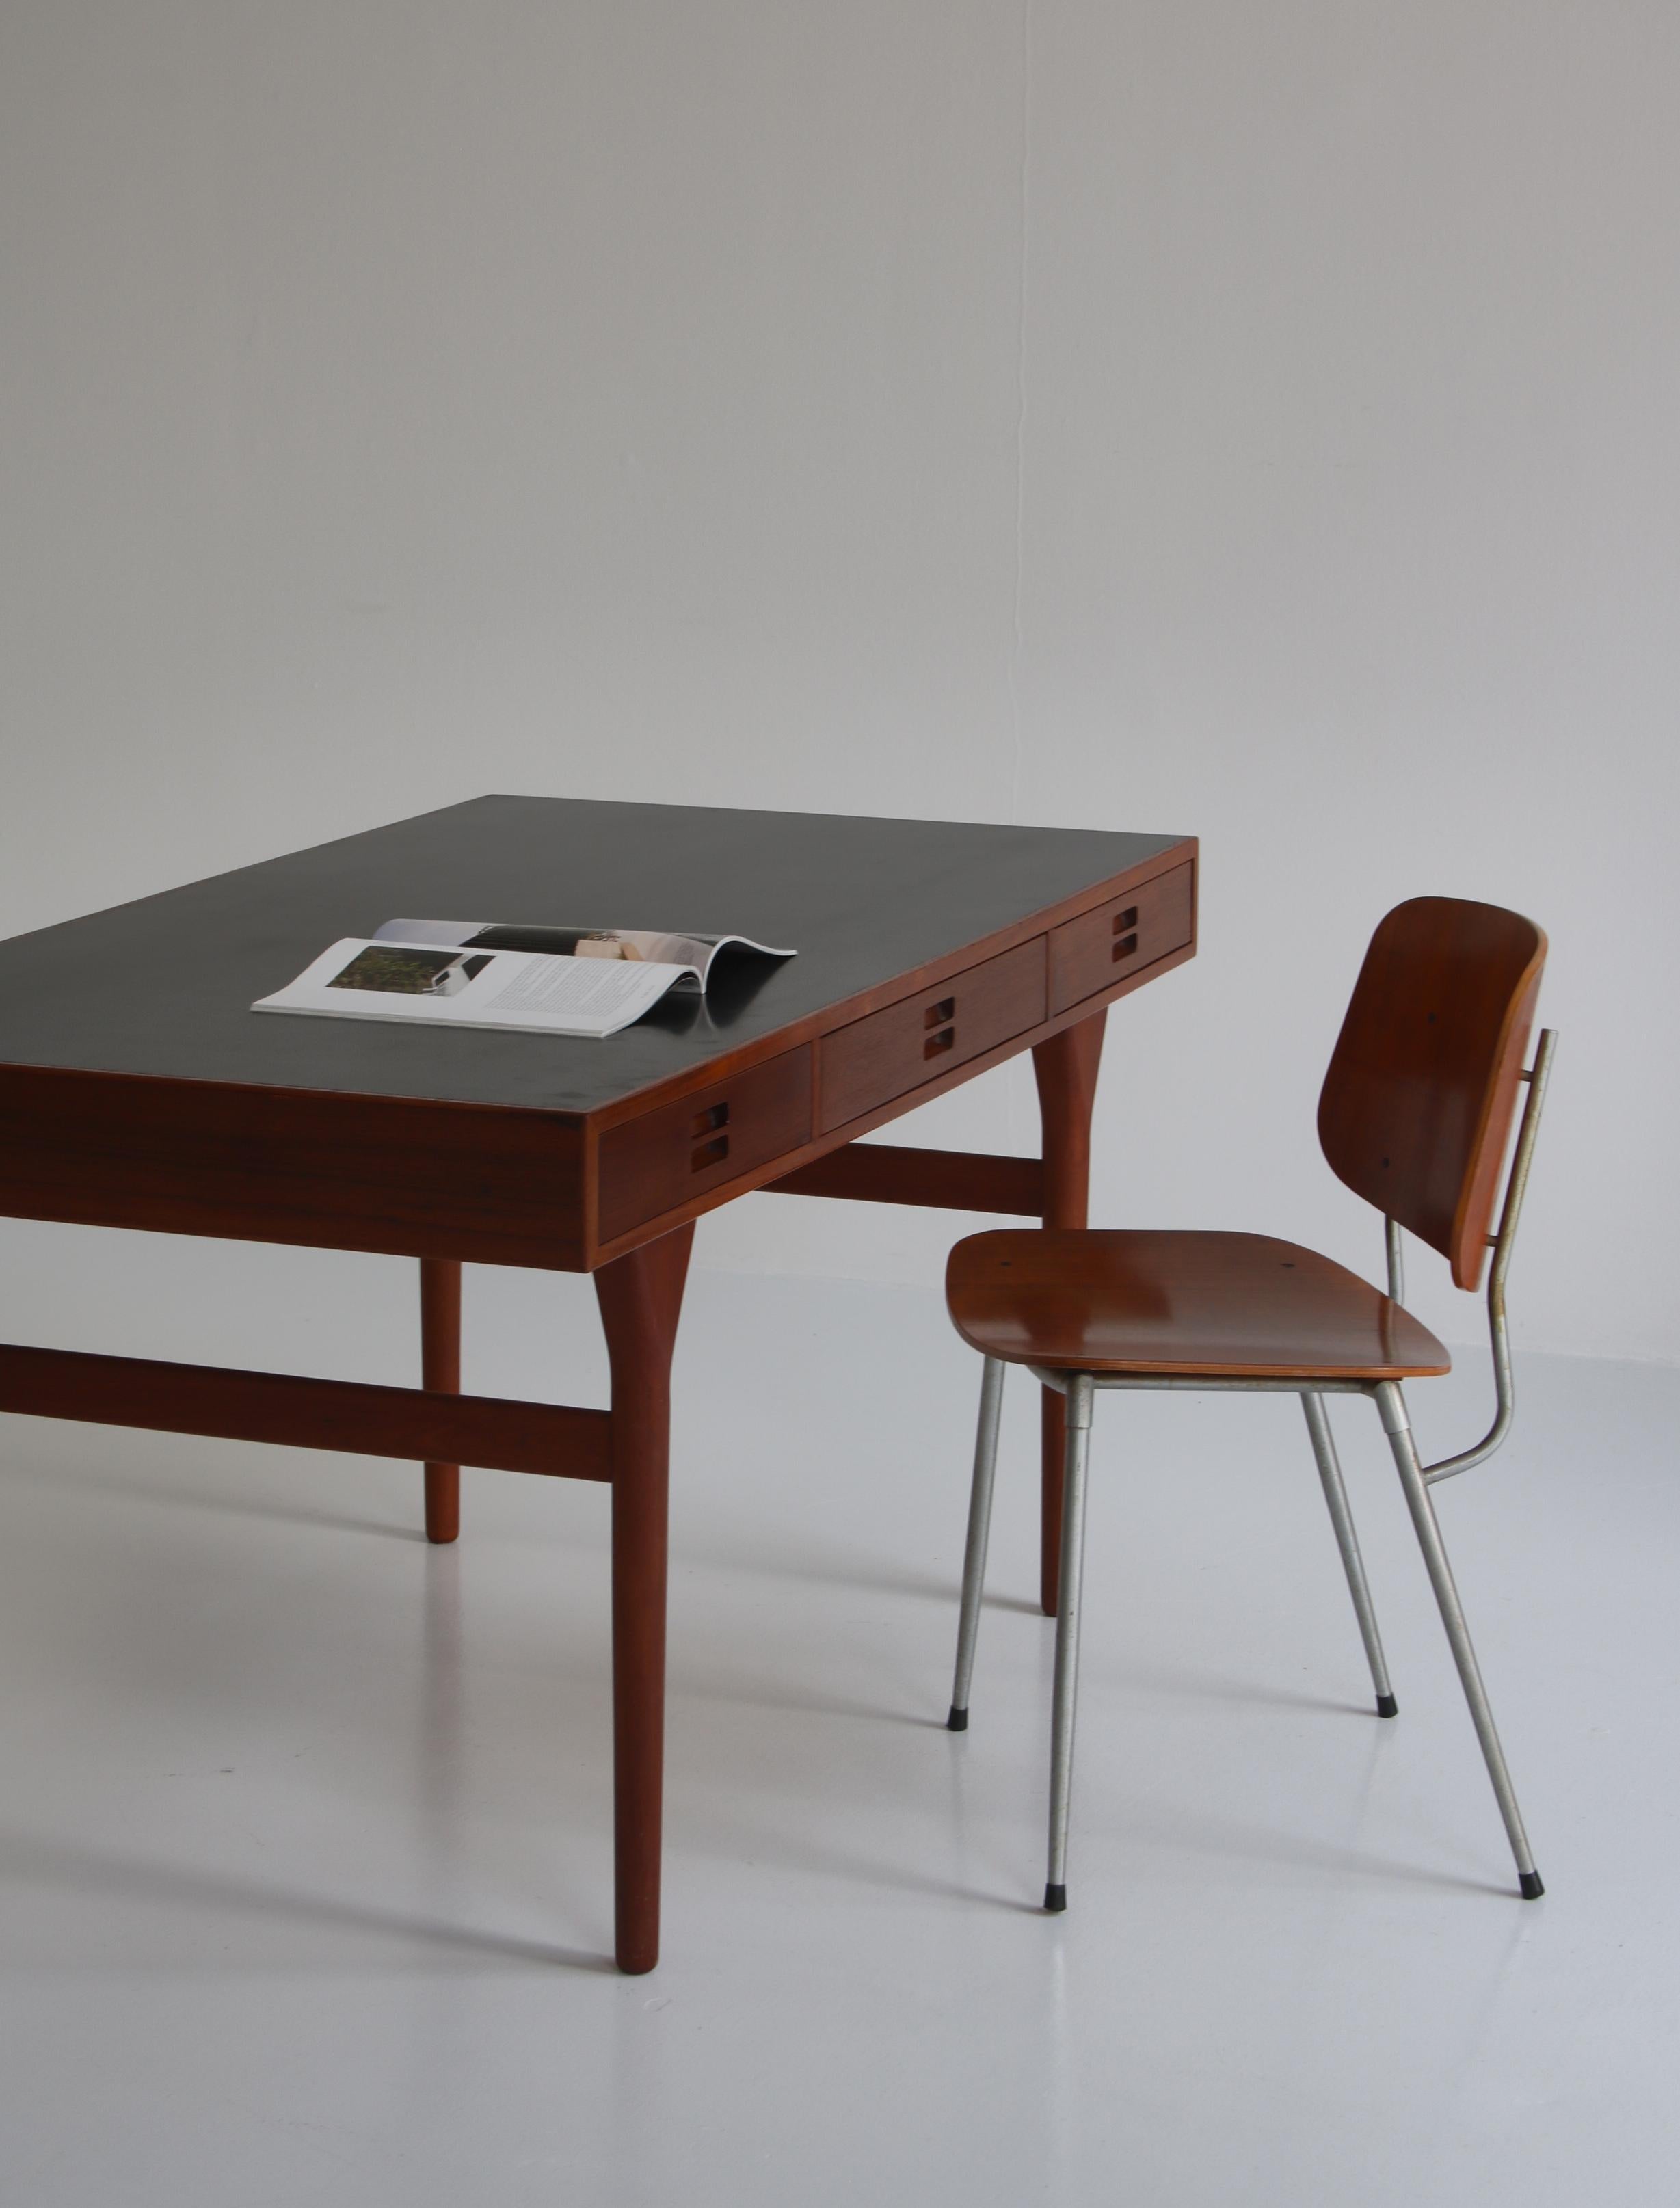 Freestanding vintage Nanna Ditzel desk in teakwood with three integrated drawers. Designed in 1955 and executed at cabinetmaker Søren Willadsen, Denmark. Original custom made piece with hard black 